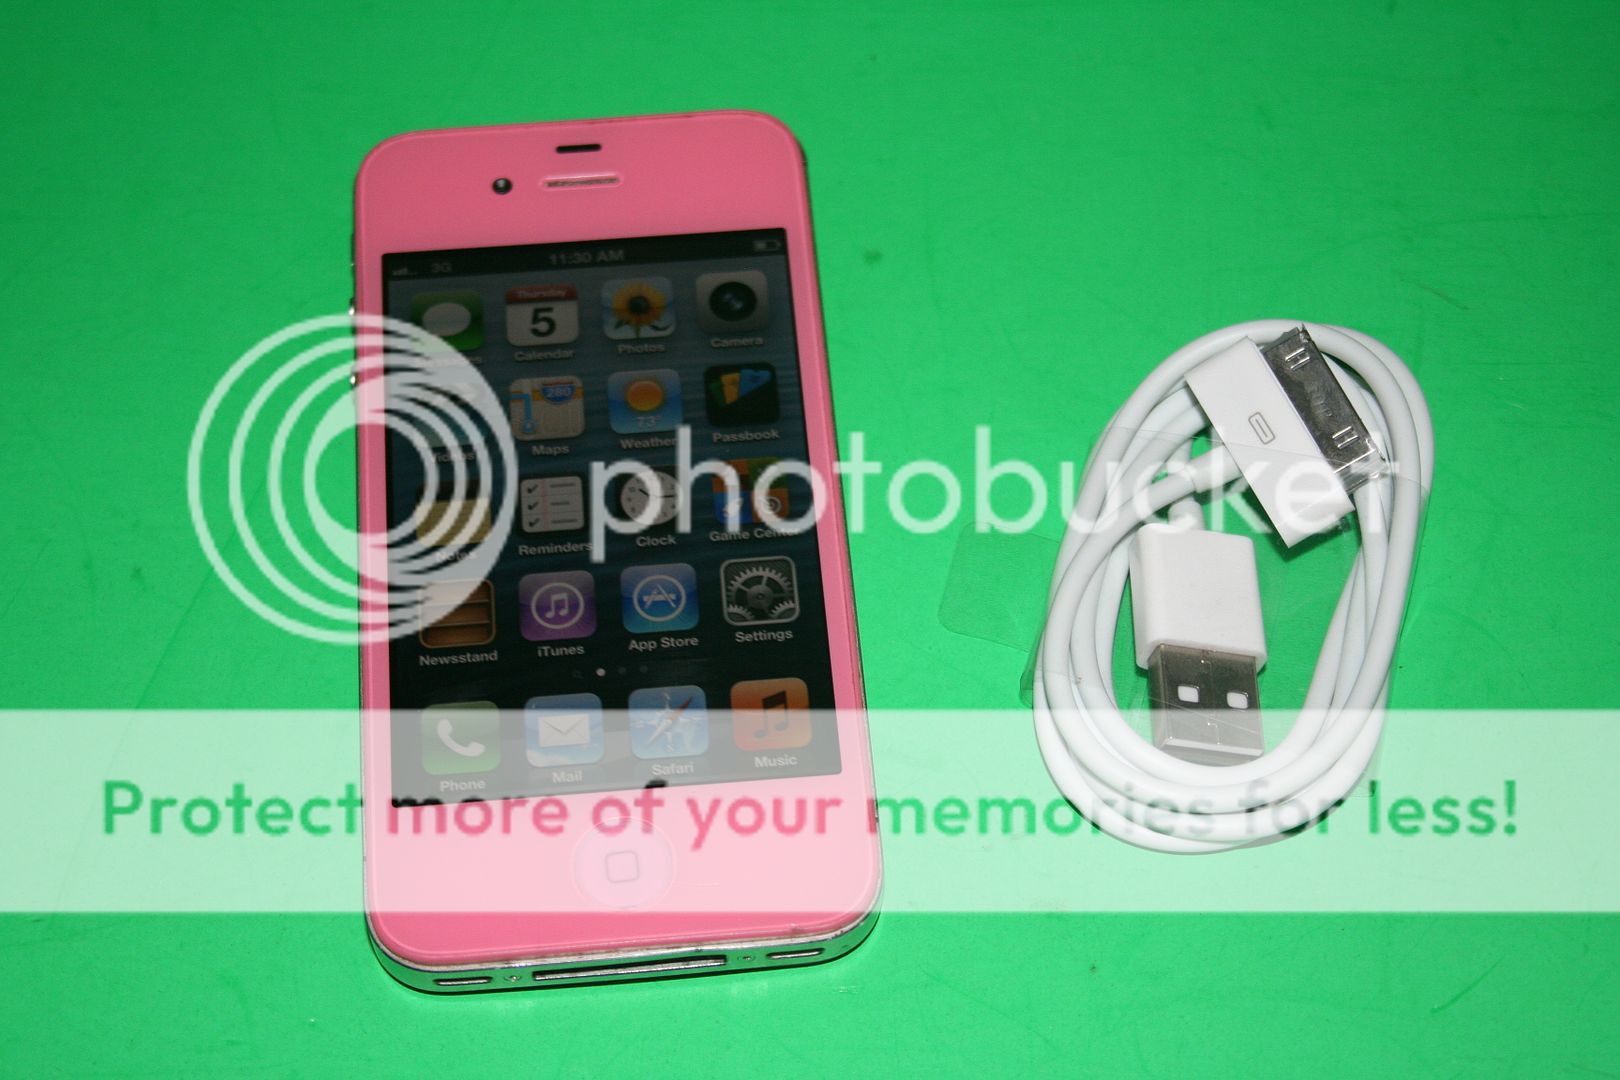 Pink Cricket Apple iPhone 4 8GB Cell Phone Fully Flashed Smartphone Jailbroken